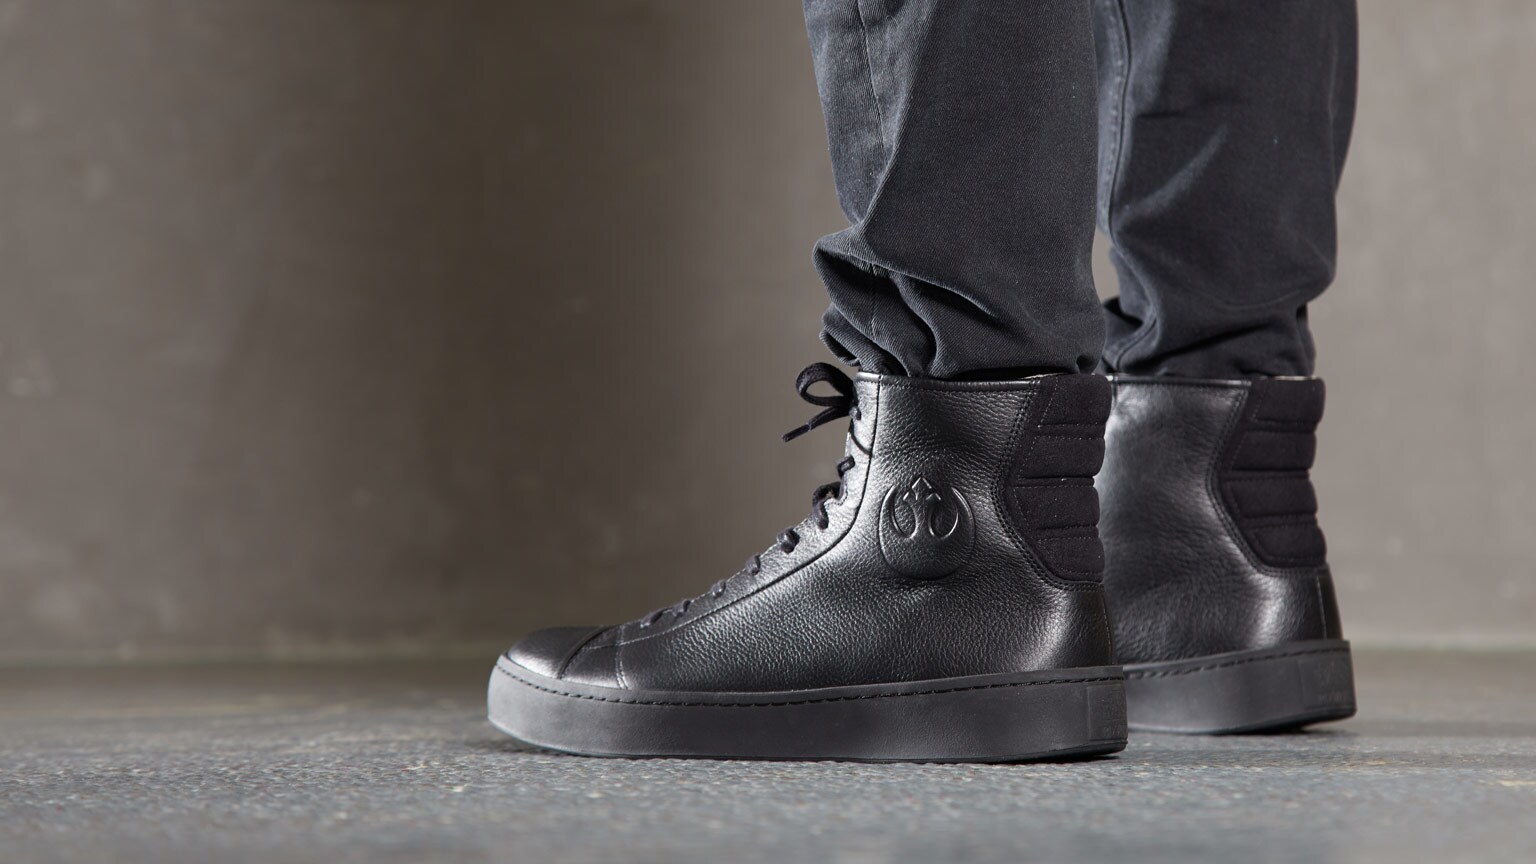 Po-Zu's Leather Resistance Sneakers: The Next Step in Rebel Fashion - Exclusive